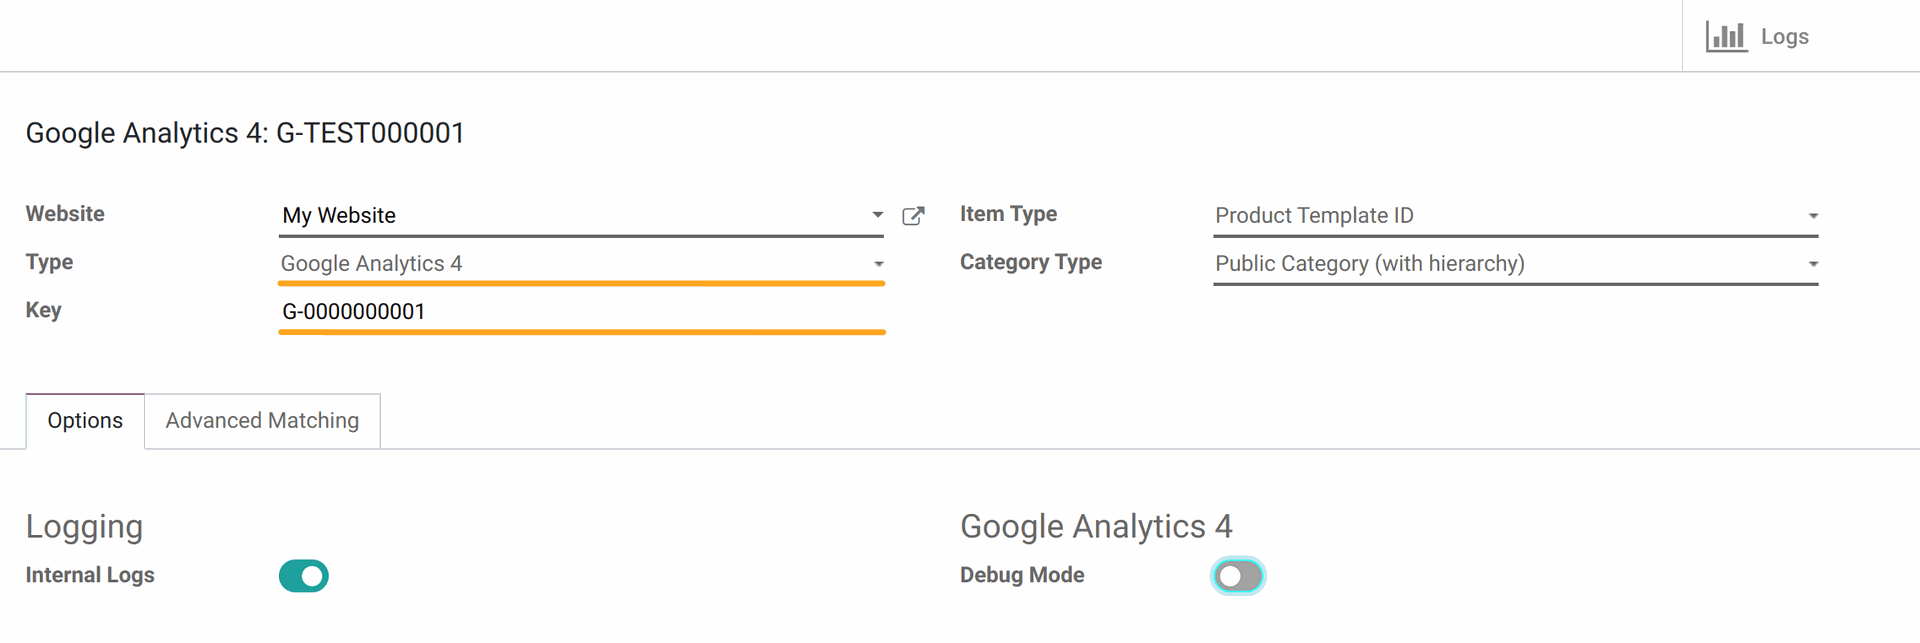 Odoo Google Analytics 4 events tracking - add a tracking service in 15.0